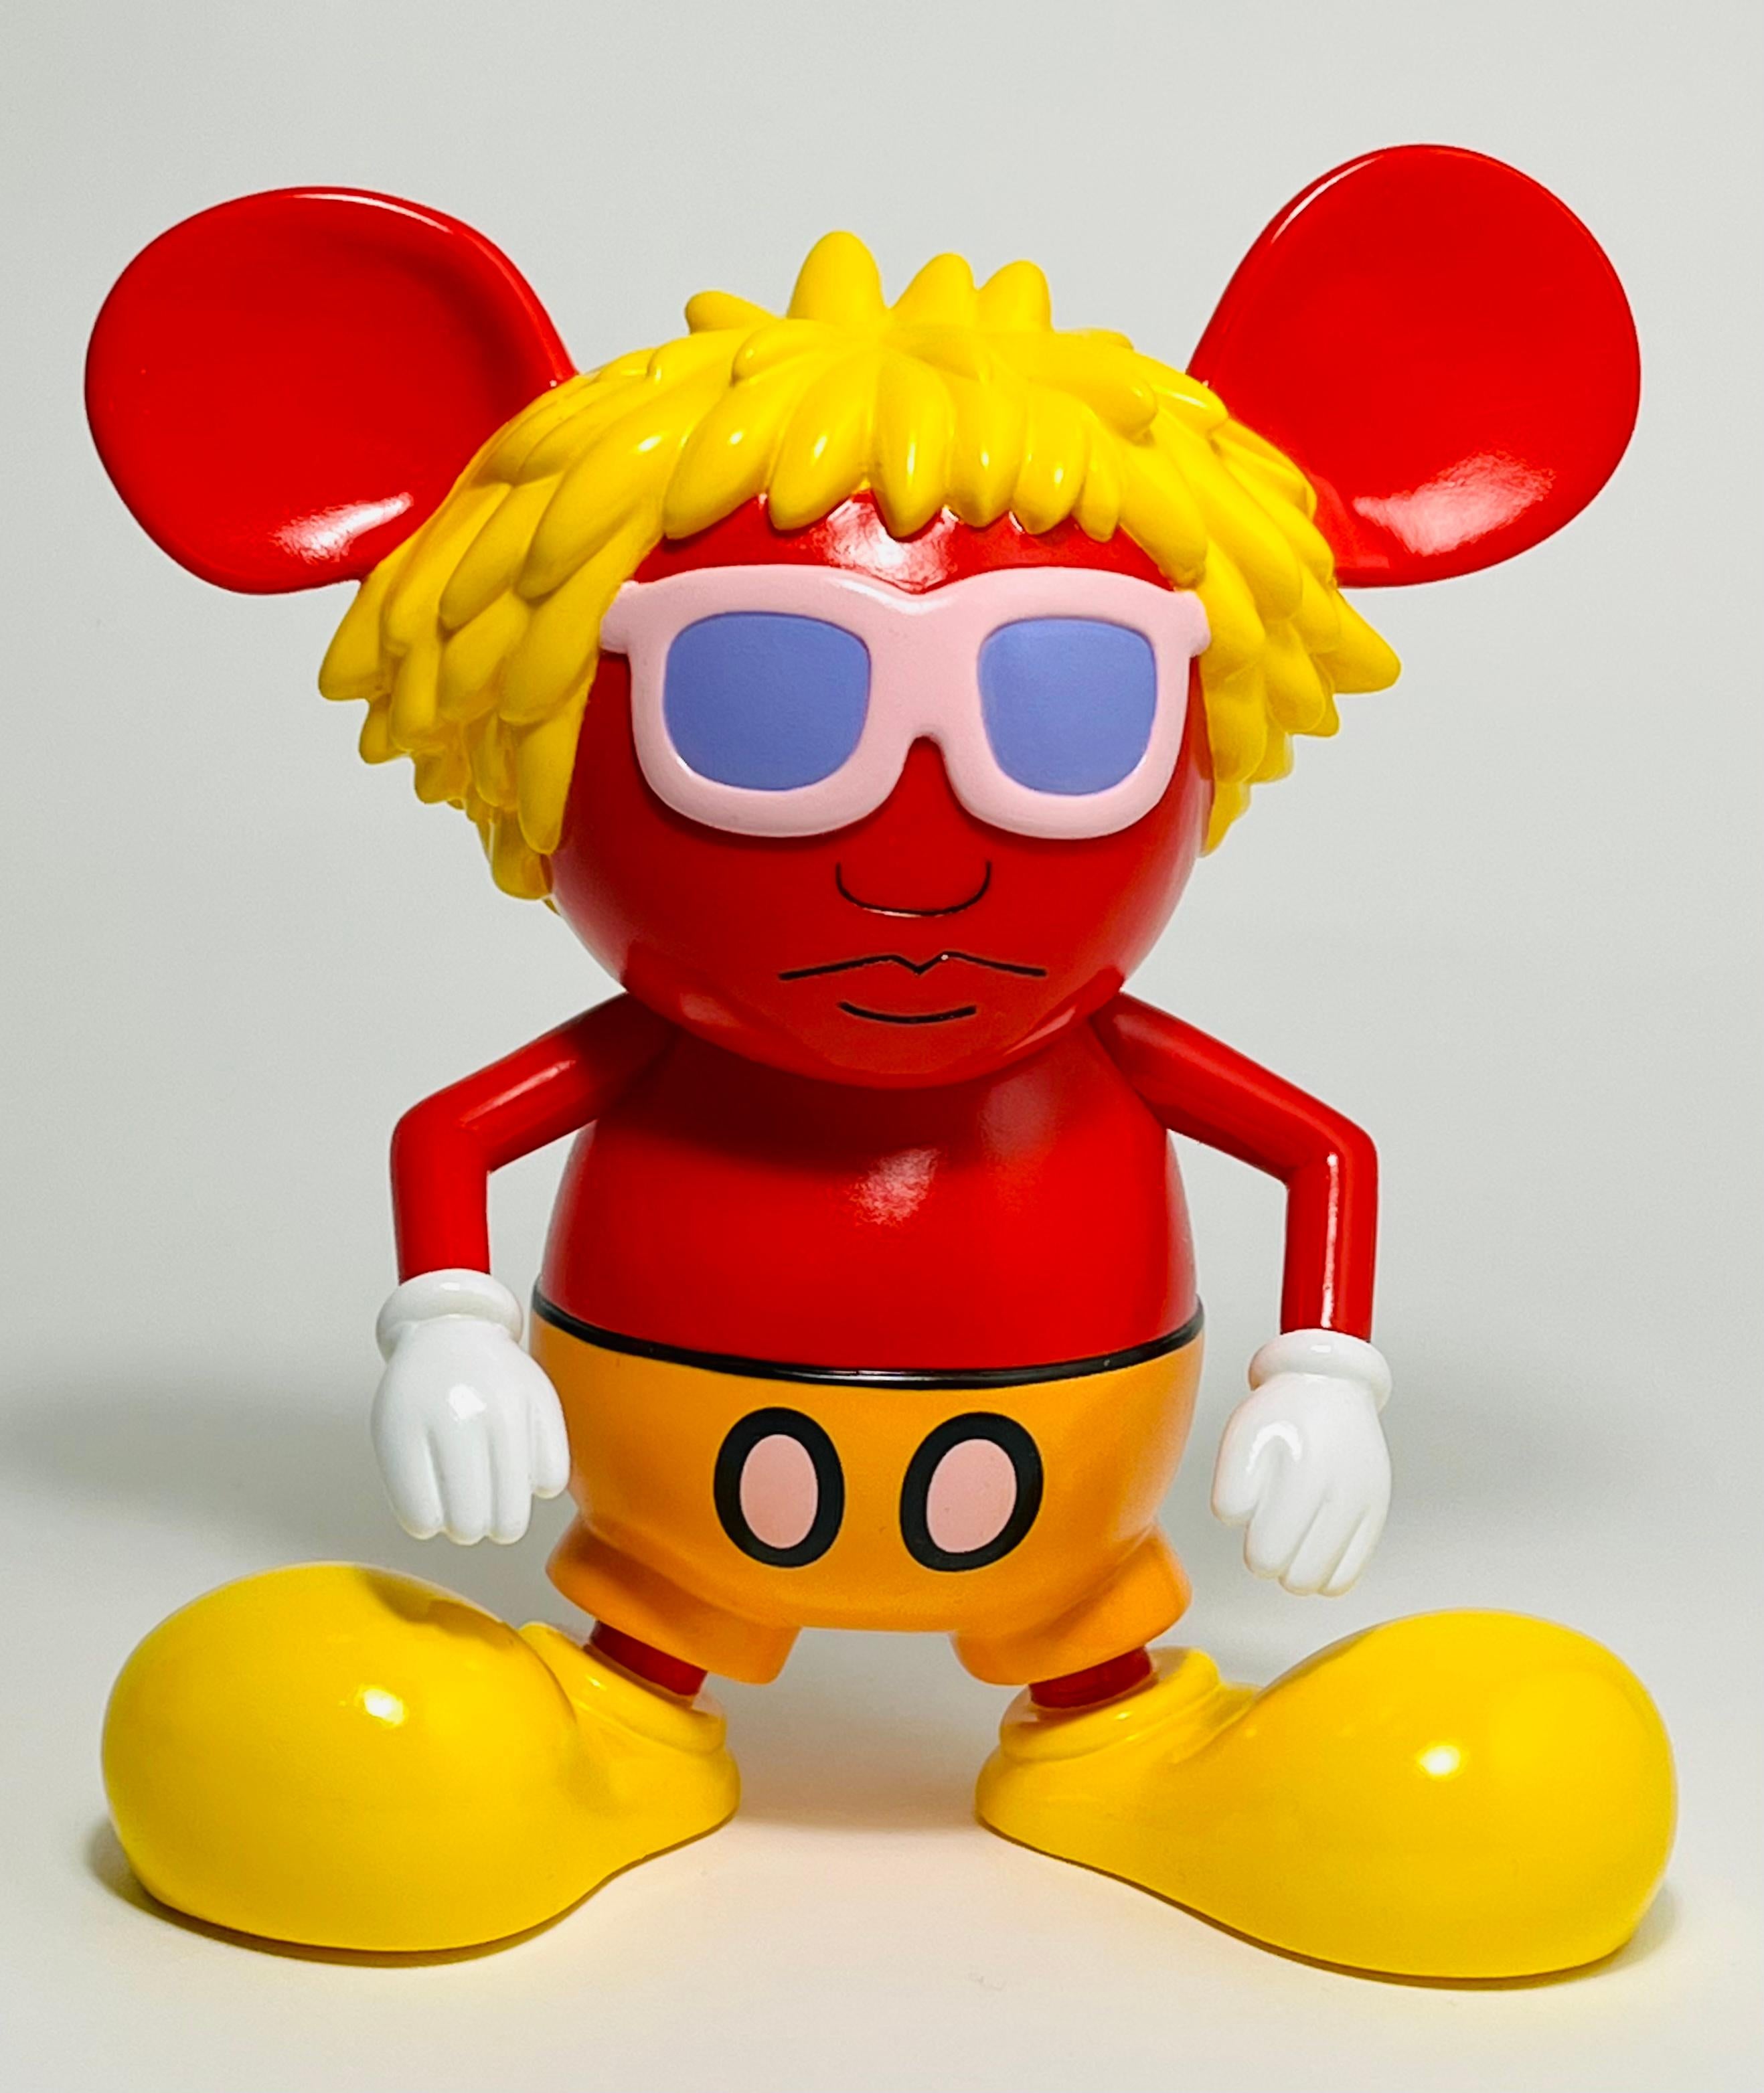 Keith Haring Andy Mouse art toy (Keith Haring Andy Warhol) - Sculpture by (after) Keith Haring